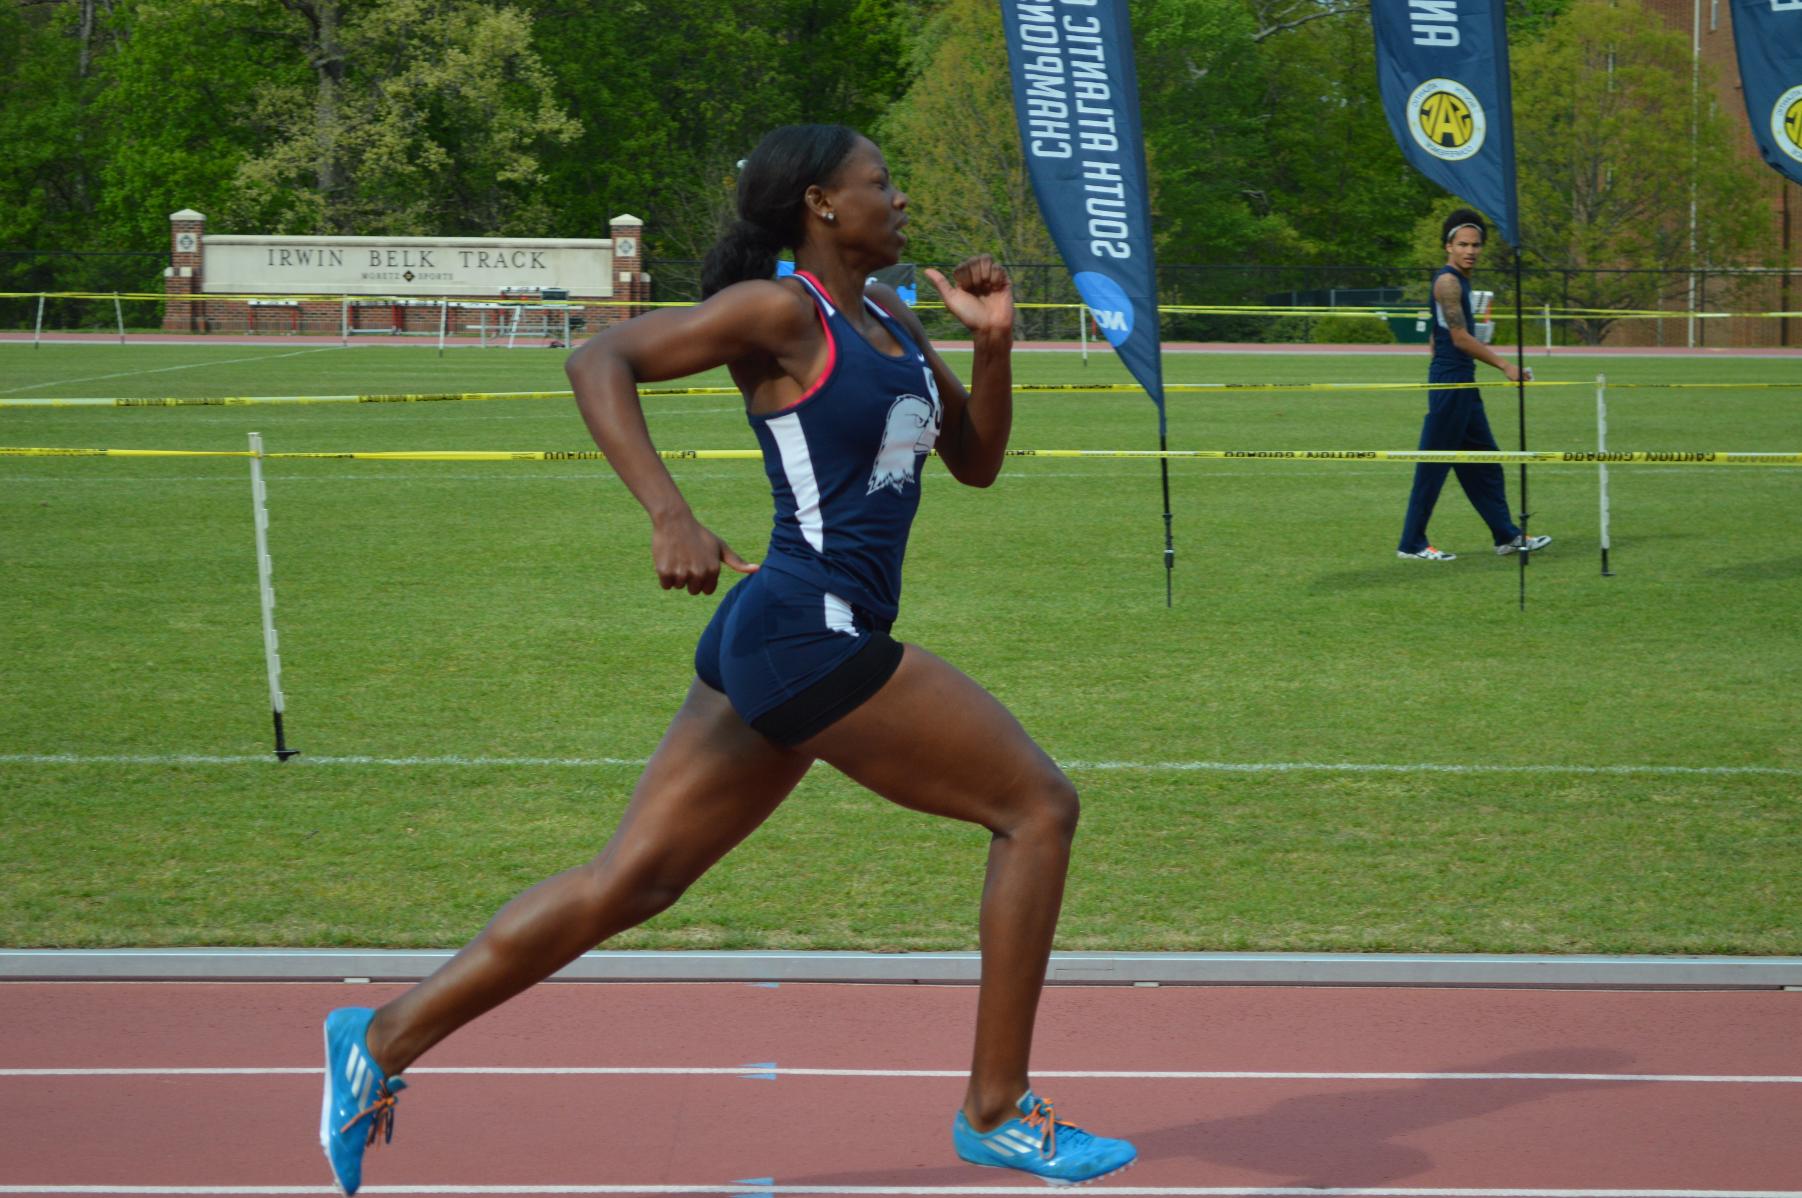 Strong opening day positions Eagles for good finish at SAC Track and Field Championships